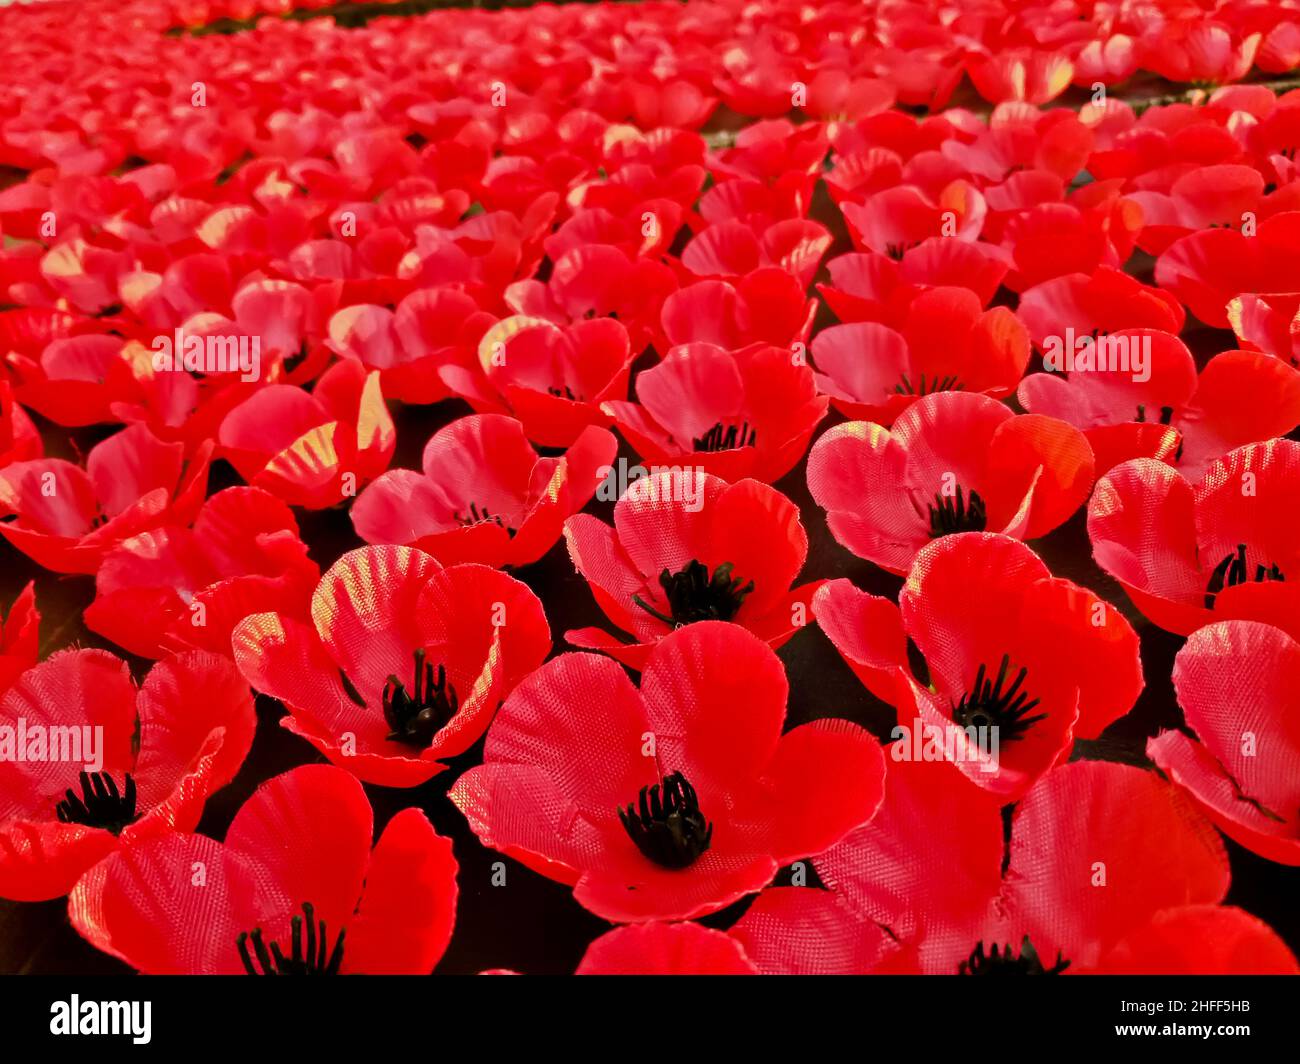 Field of red poppy flowers to honour fallen veterans soldiers in the battle of Anzac day Stock Photo